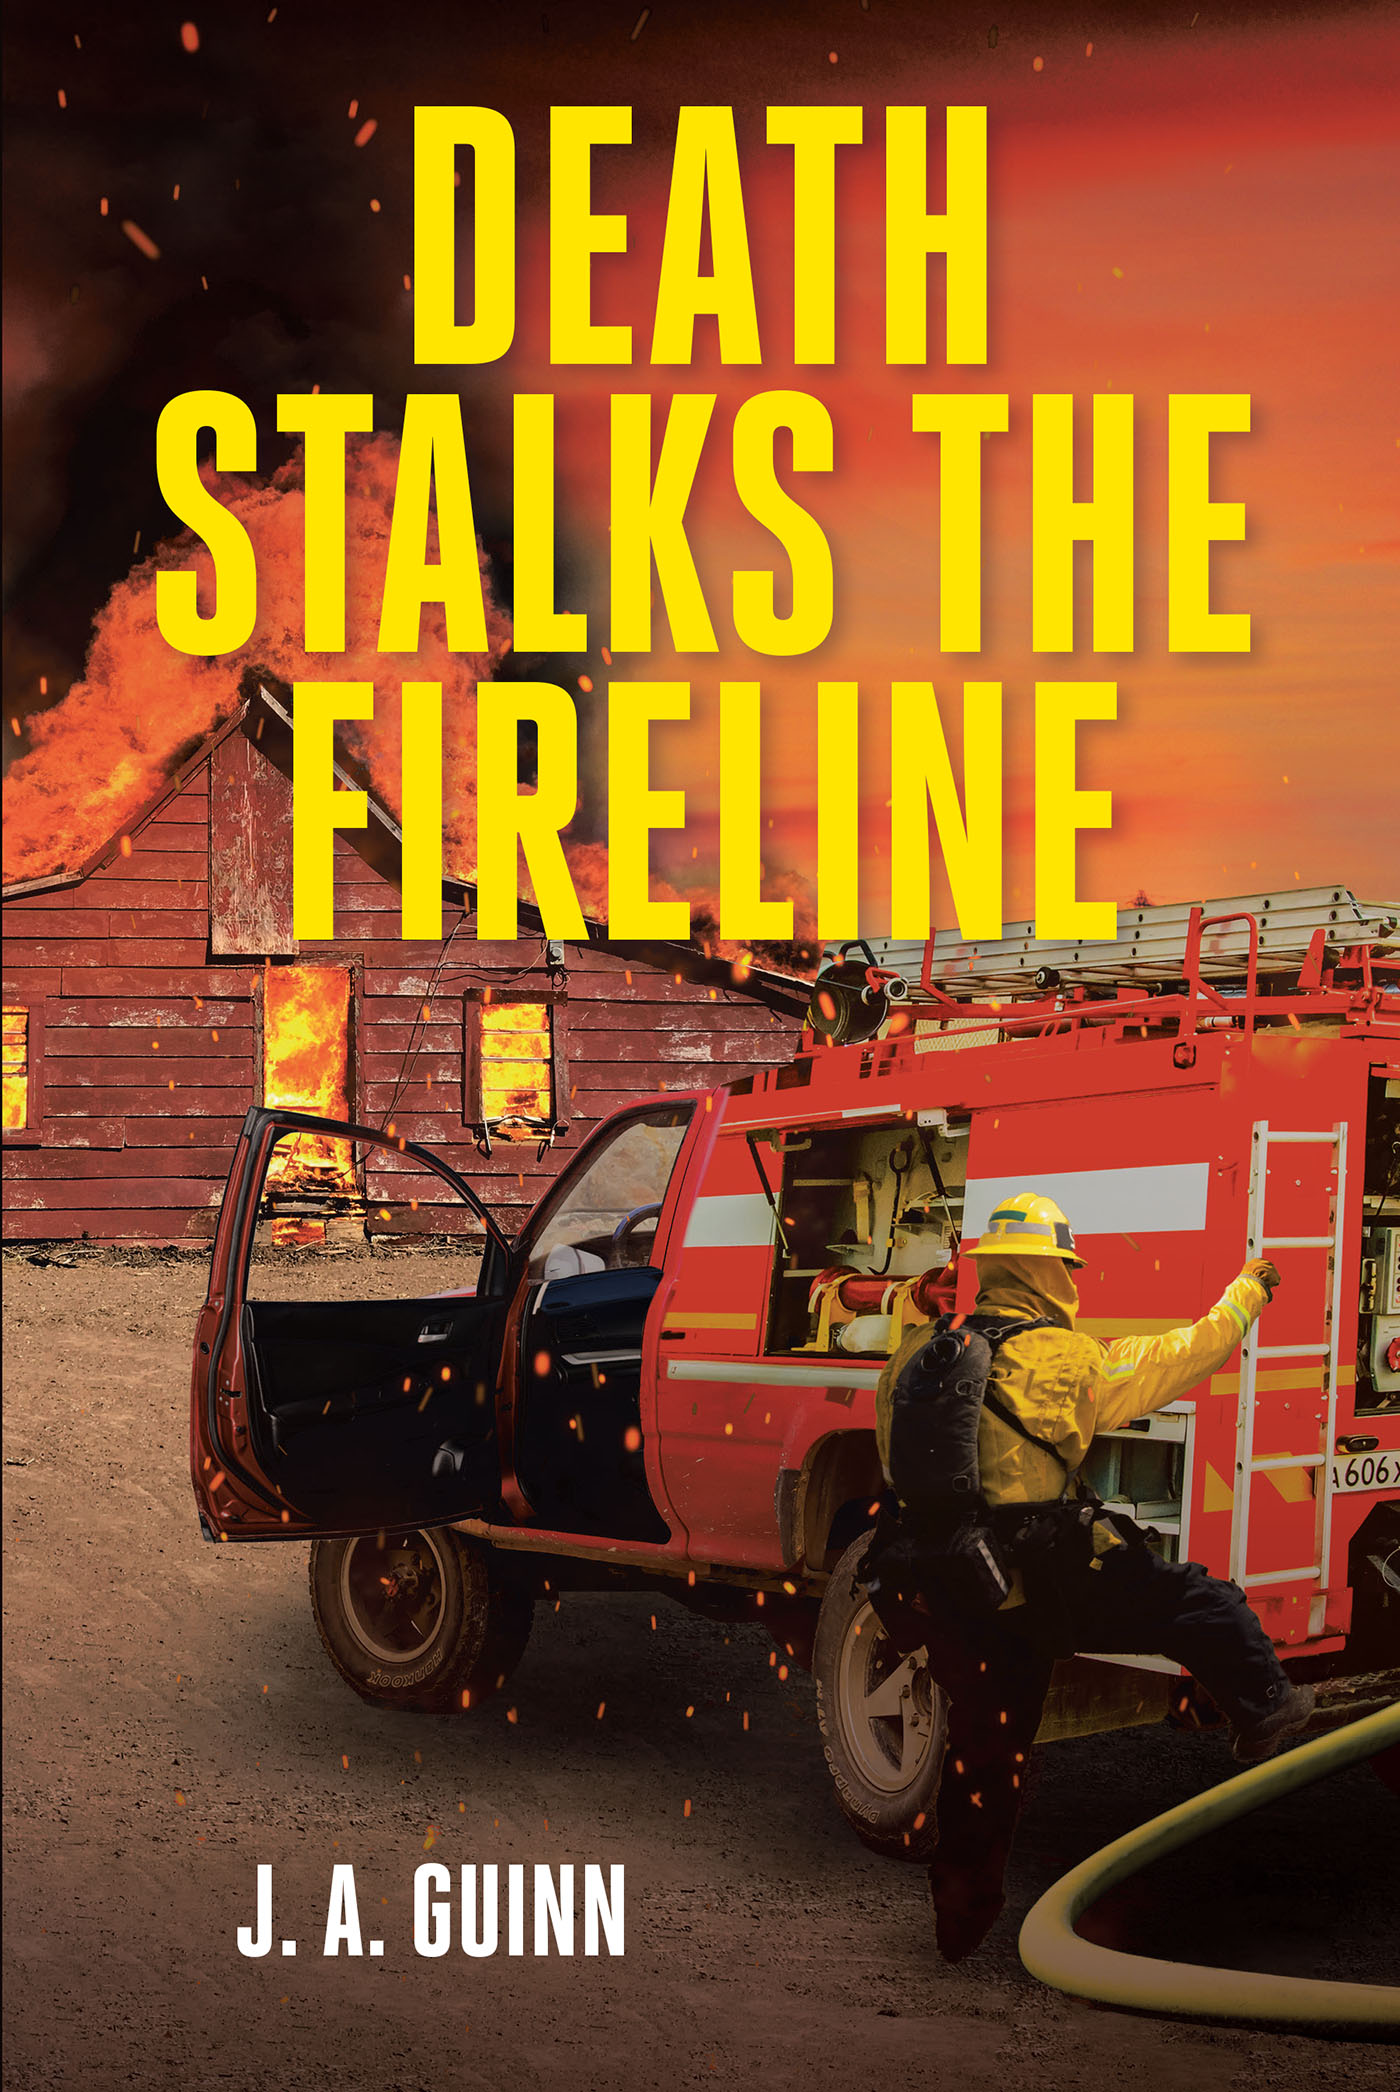 J. A. Guinn’s Newly Released "Death Stalks the Fireline" is a Breakneck Race to Uncover a Dangerous Plot Targeting Local Fireman